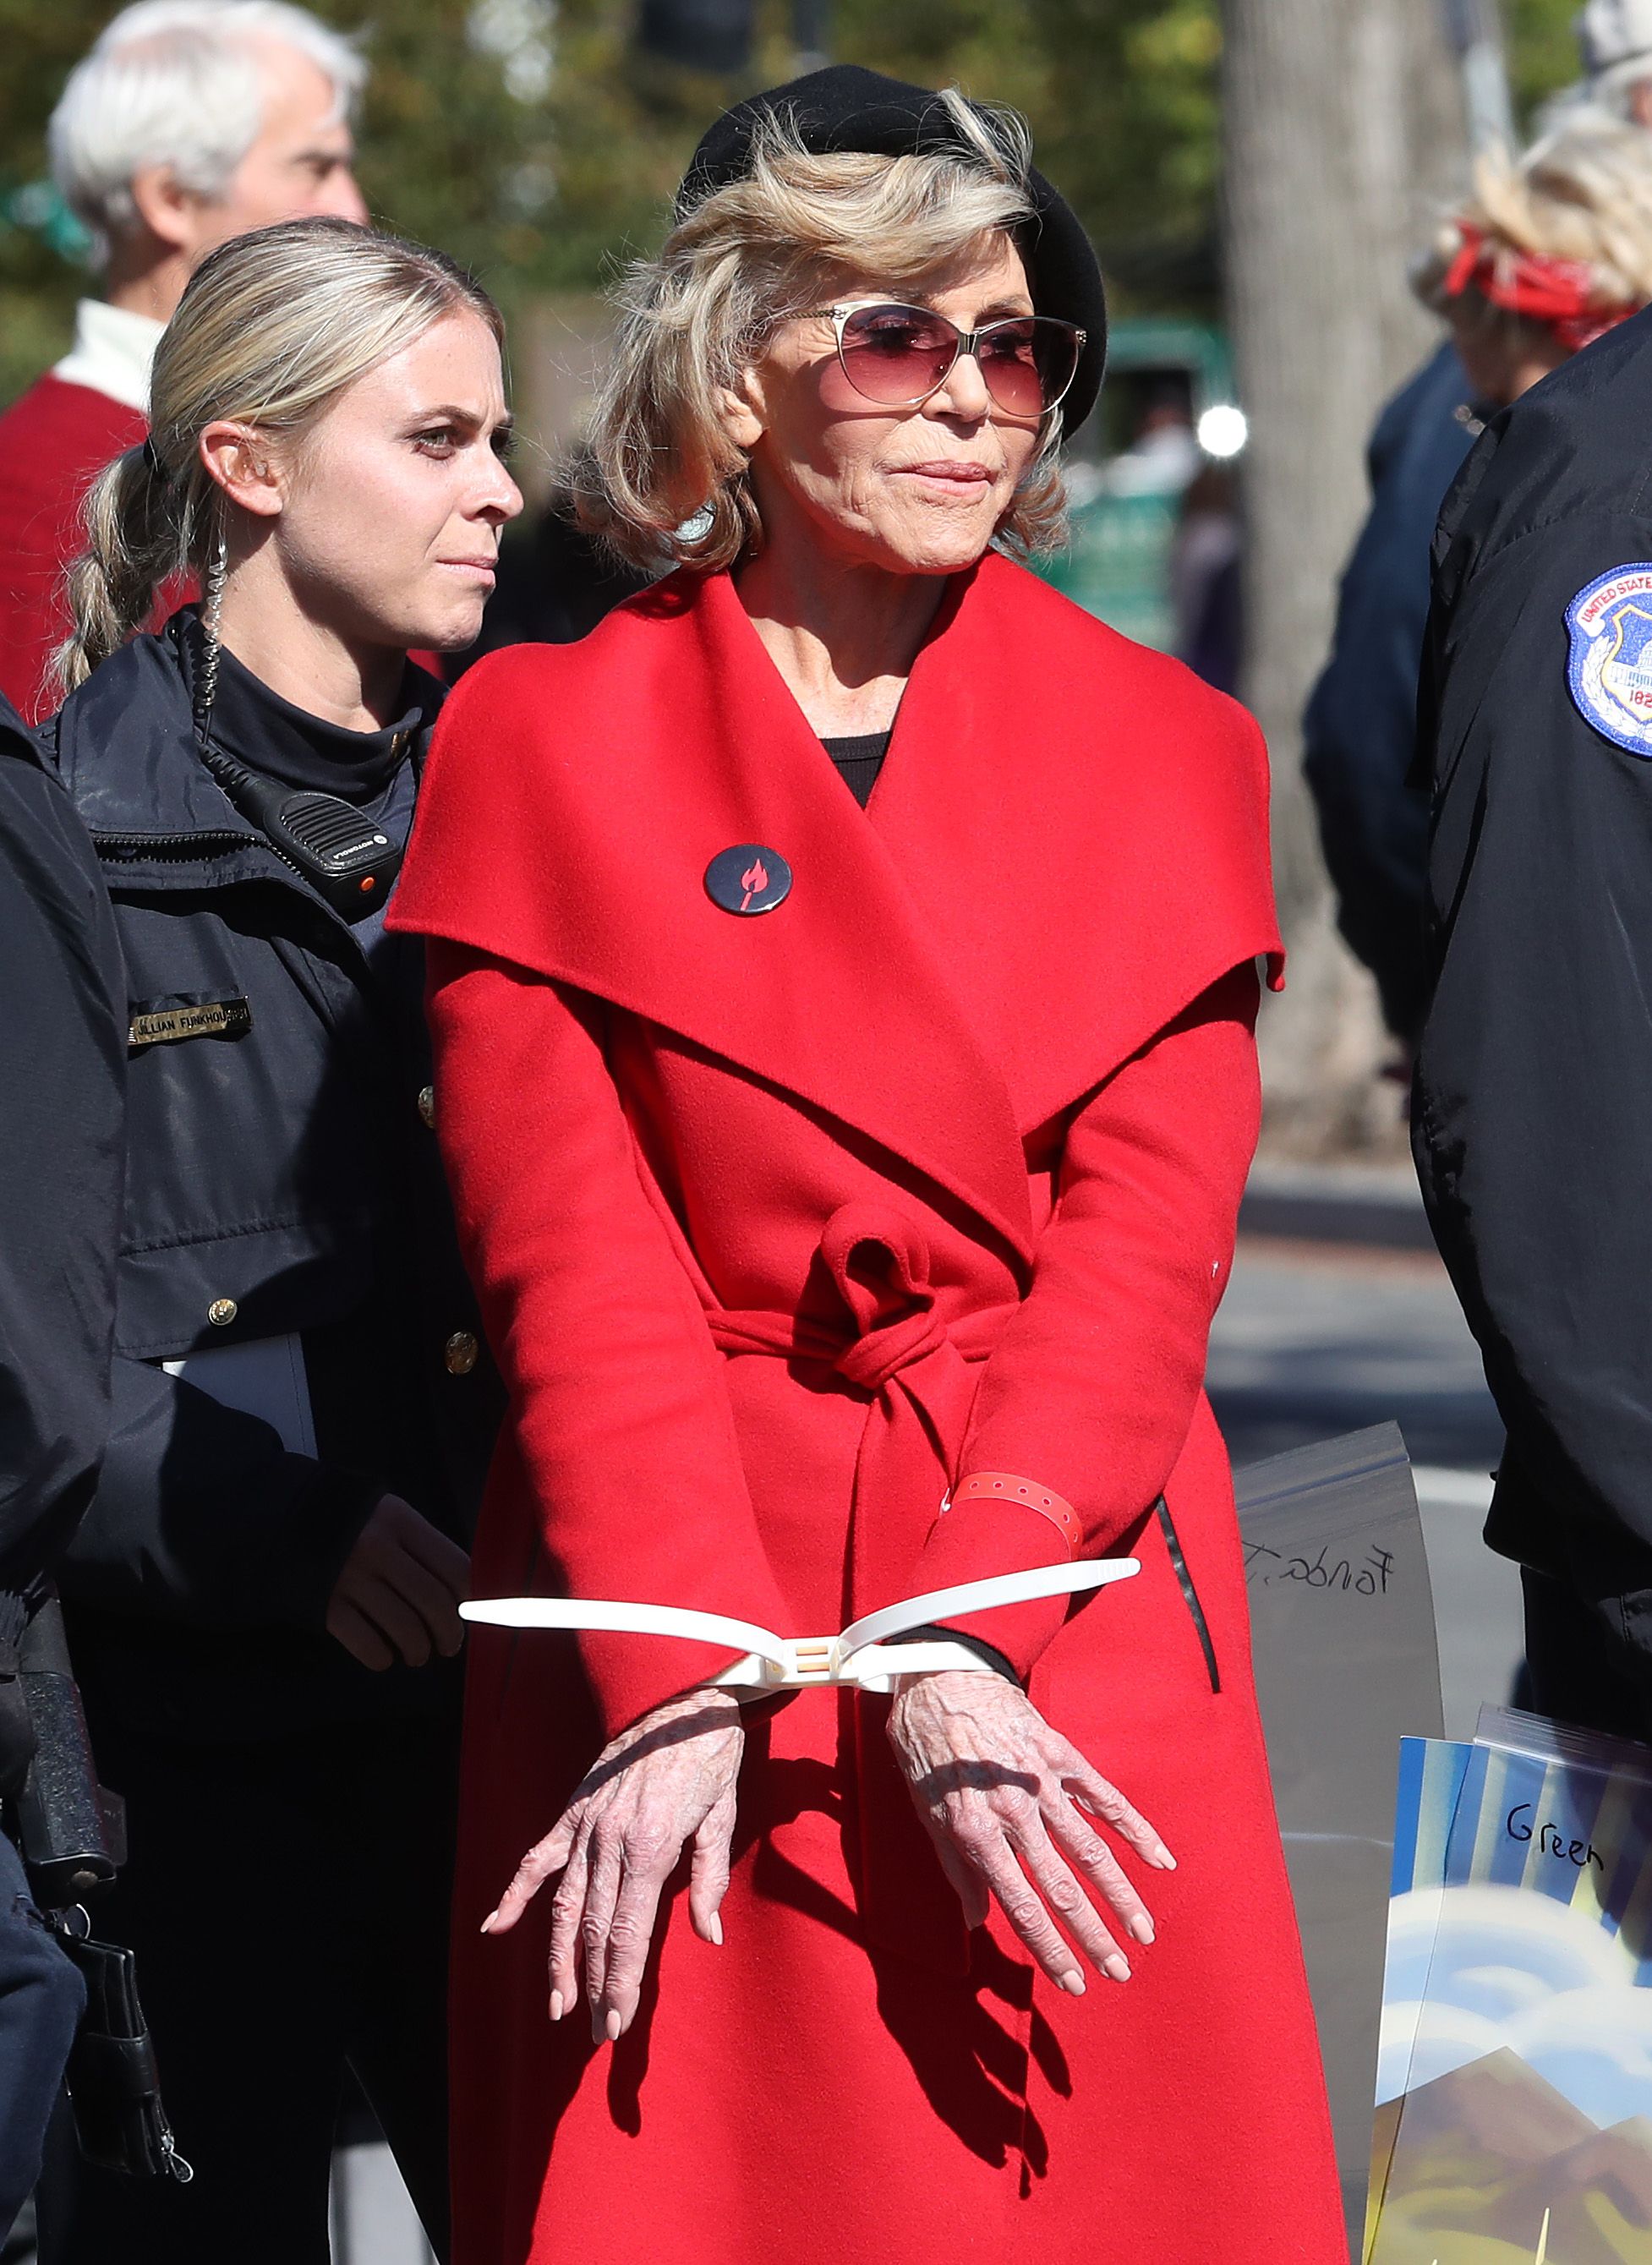 Why Won't Go After Her Red Coat